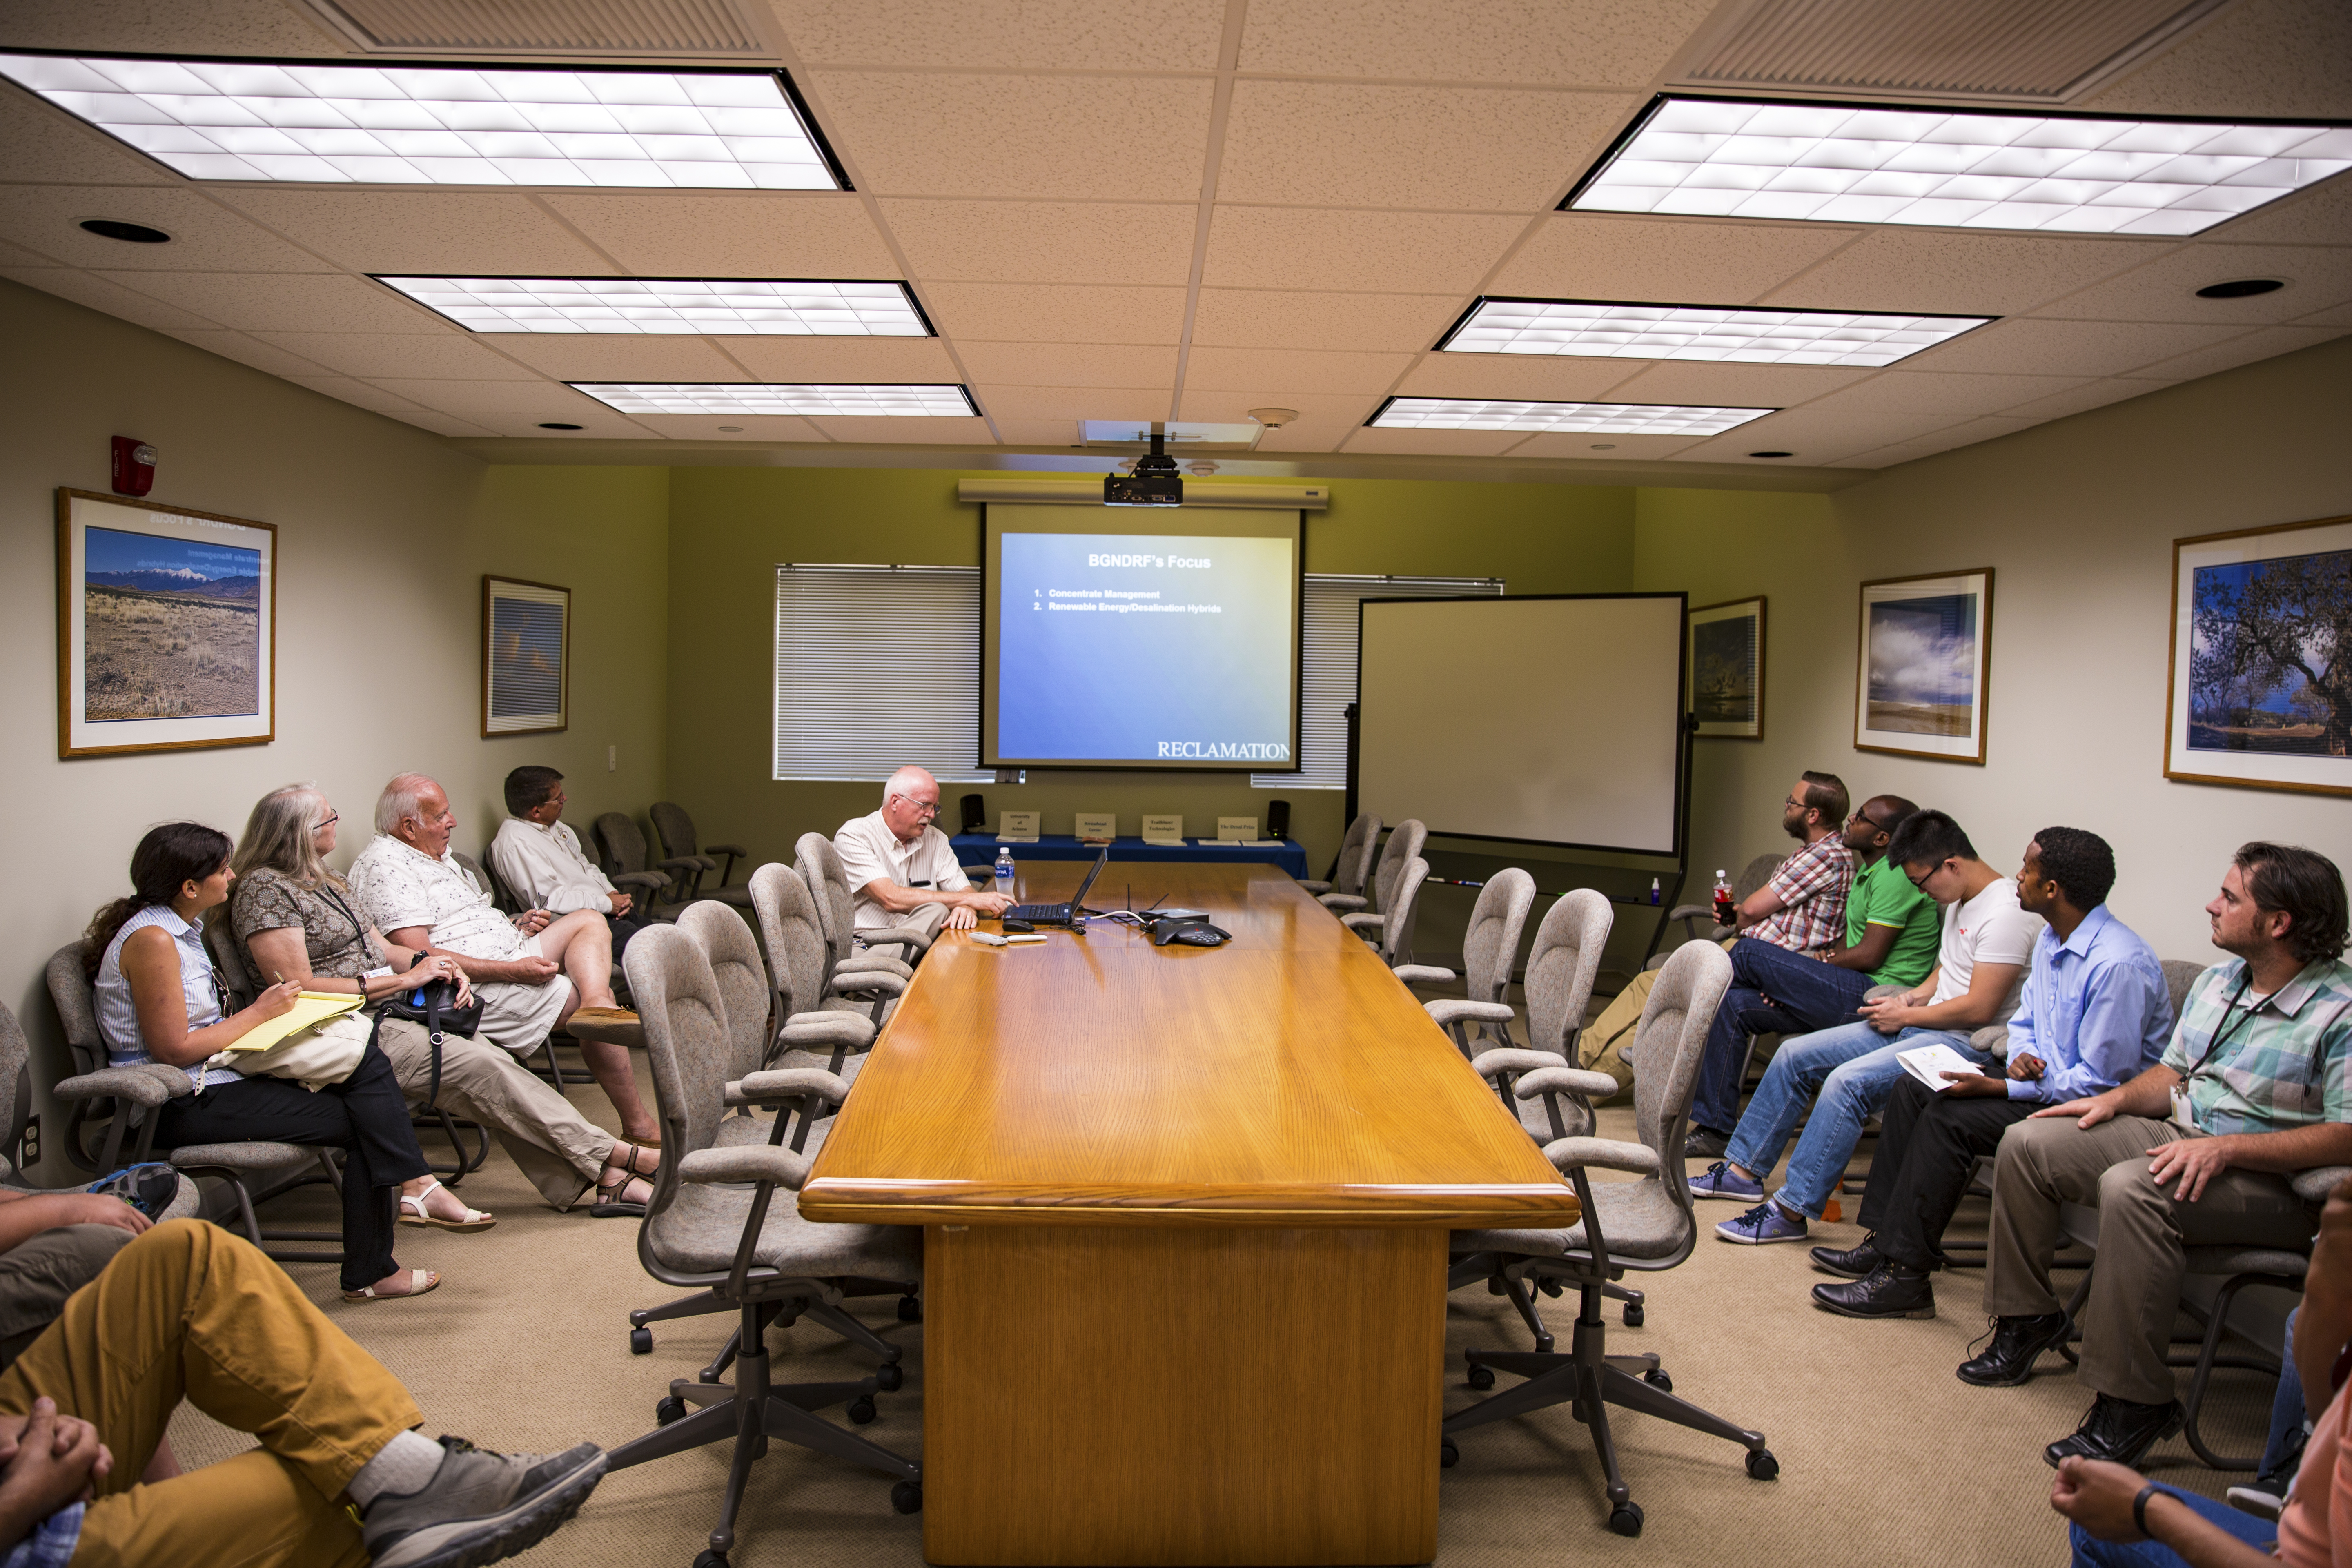 Conference Room during the 2016 BoR Conference